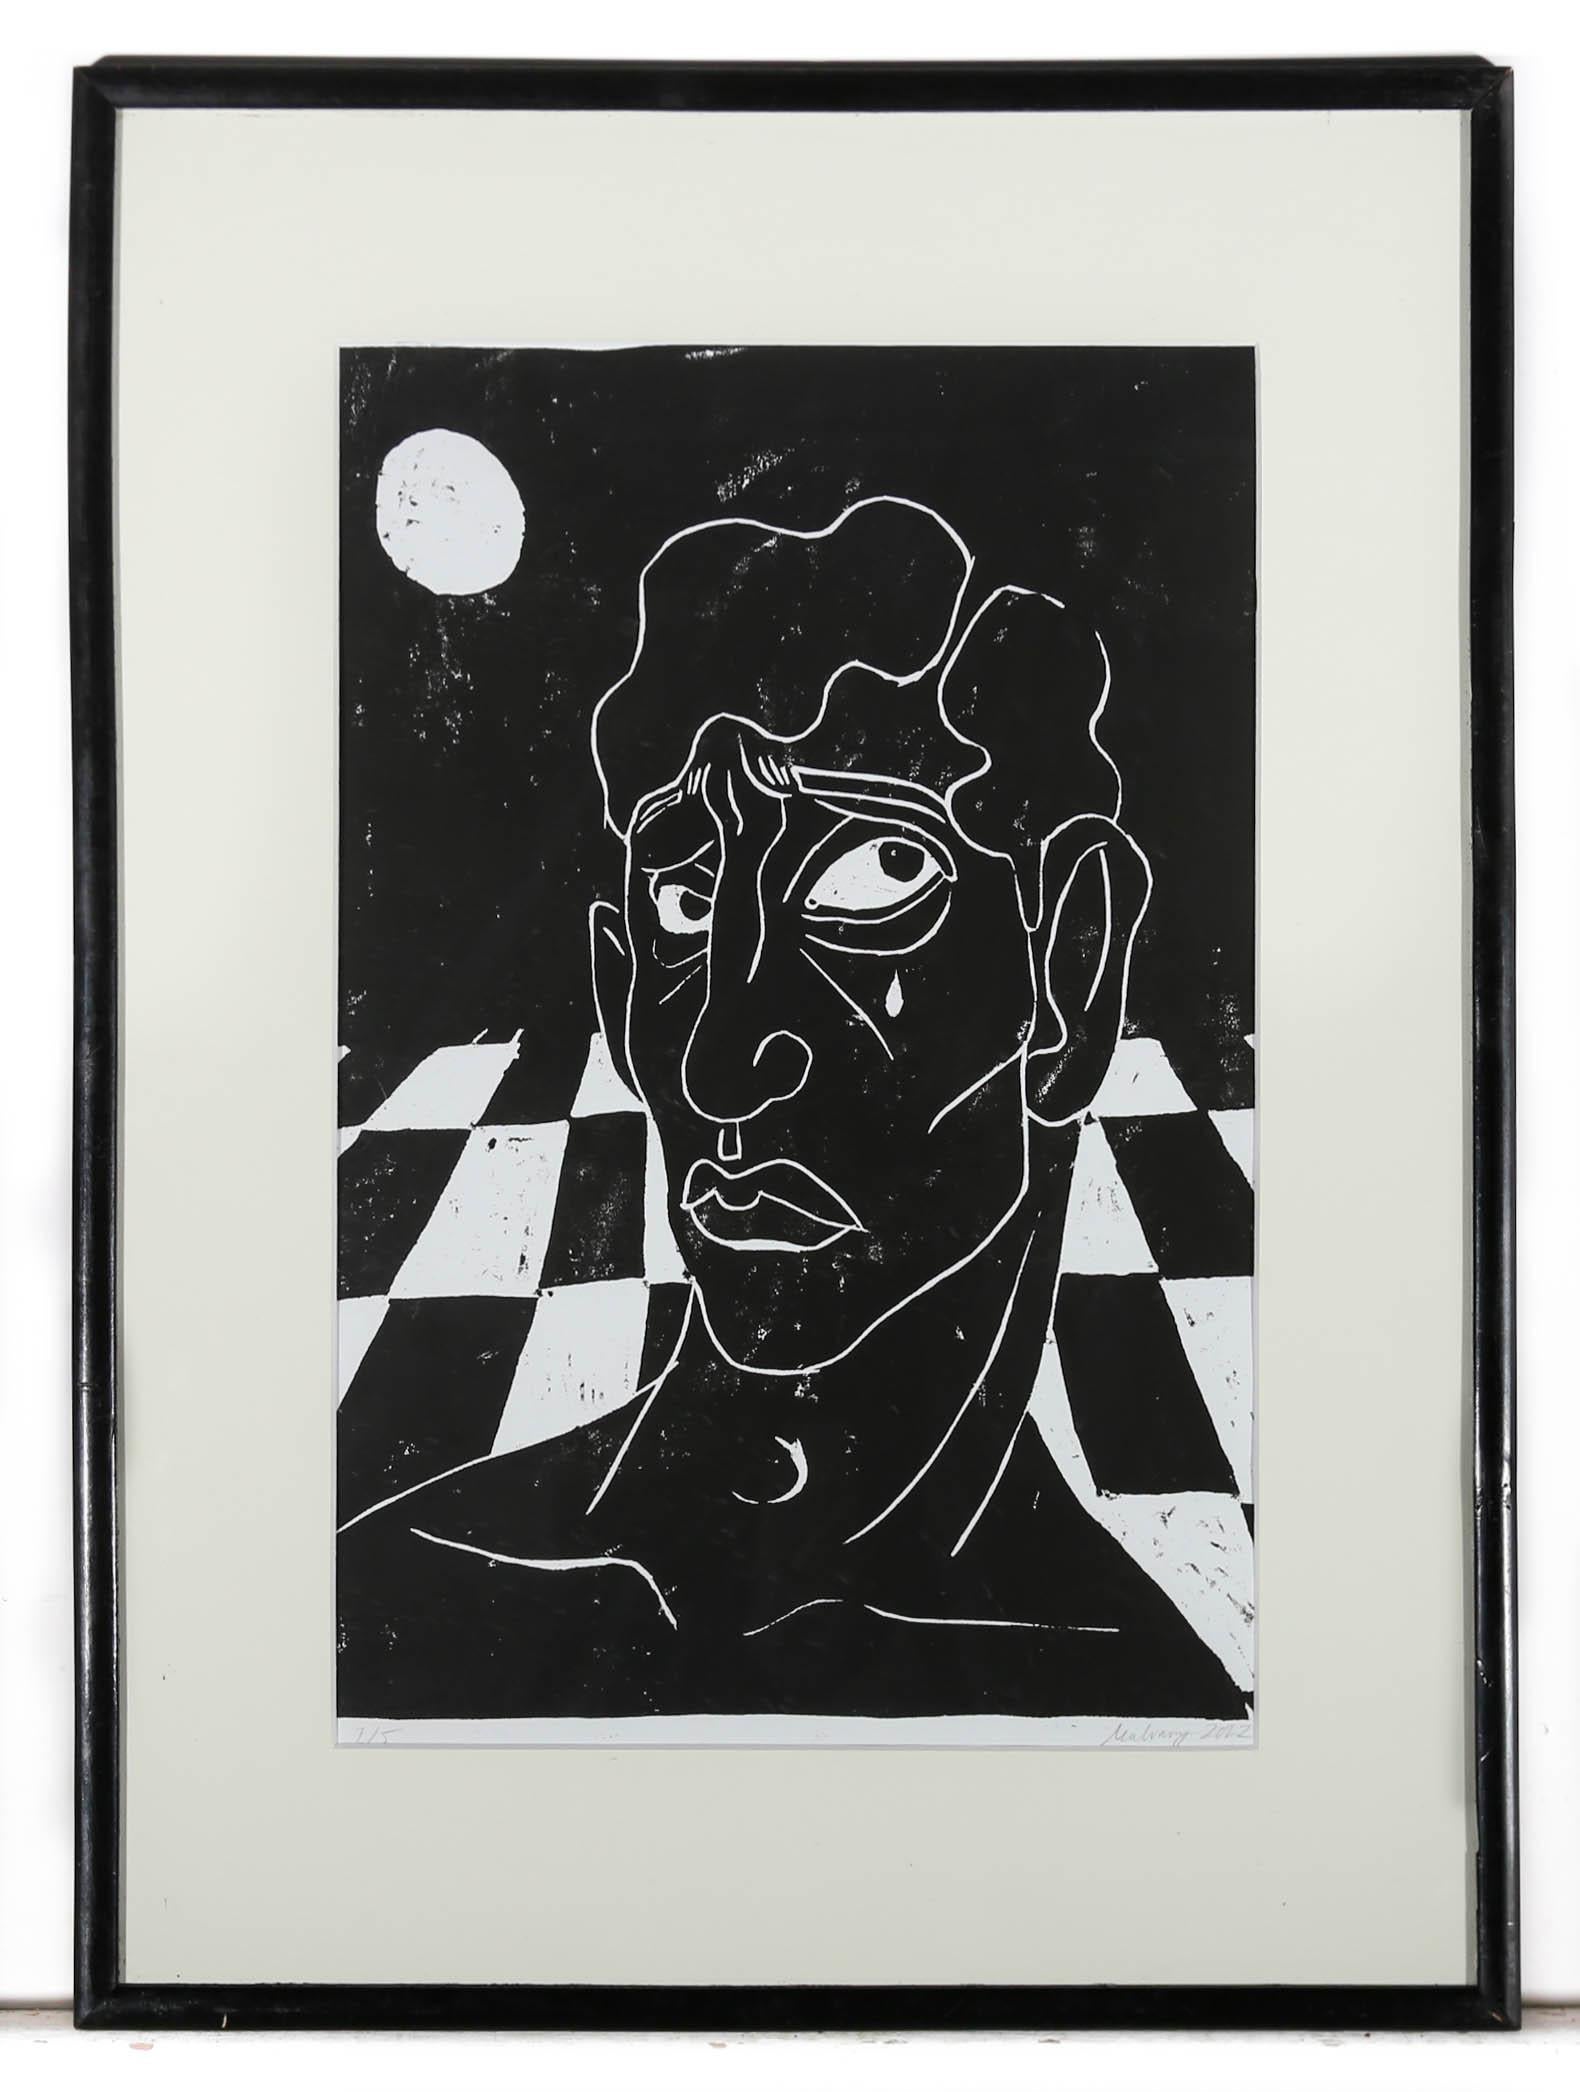 A striking monochrome woodcut showing a melancholy young man with a single tear rolling down his cheek beneath a full moon. The artist has signed and dated to the lower right and numbered 1/5 to the lower left corner. Presented in a simple black